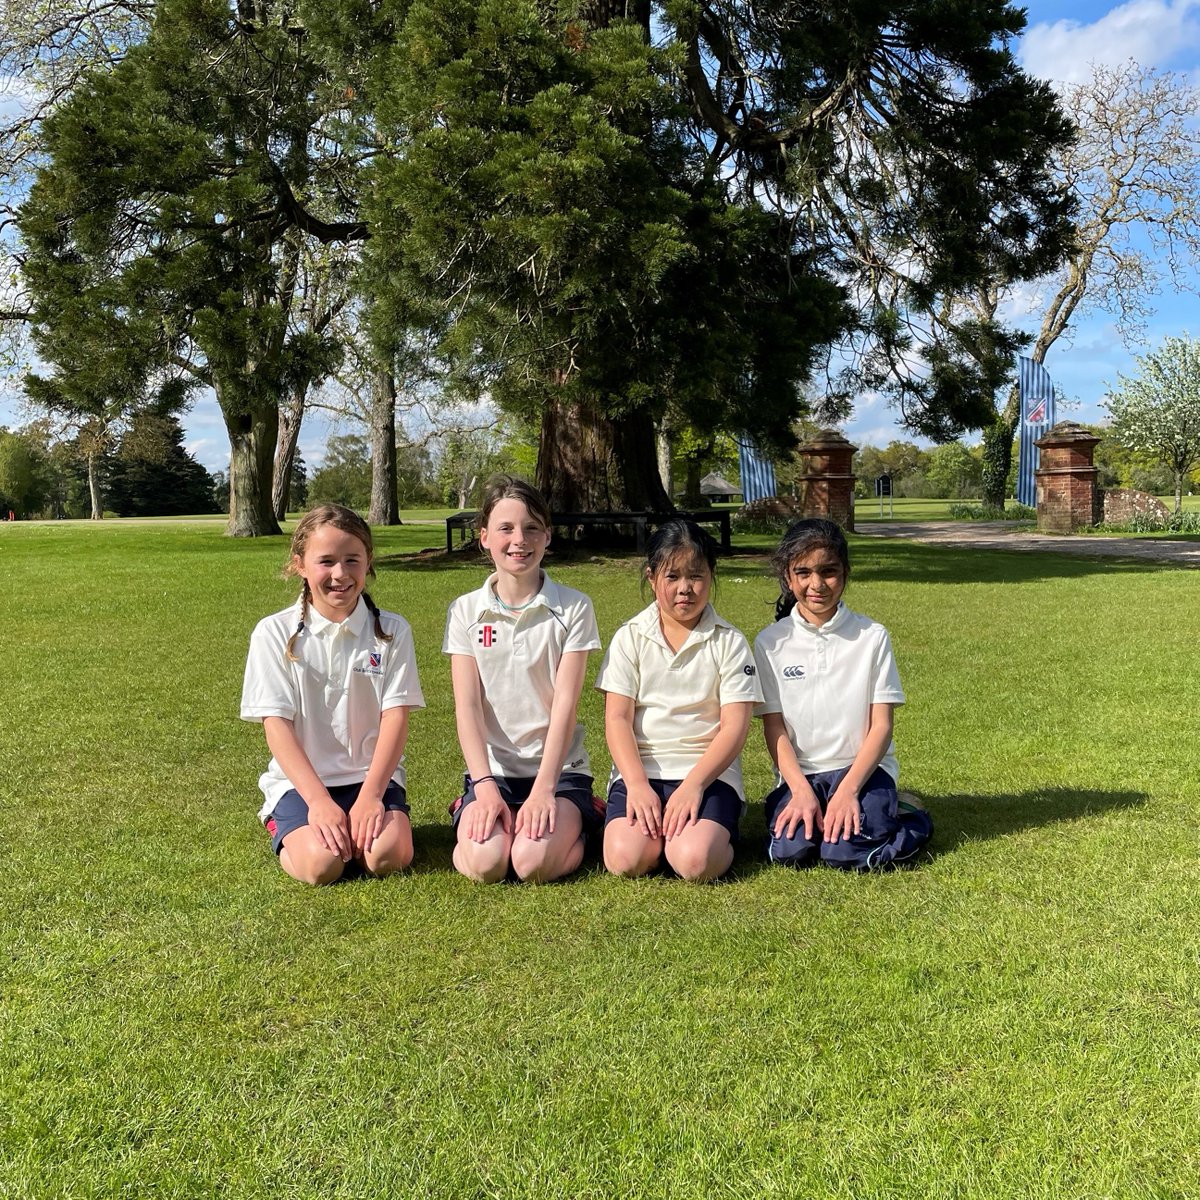 Good luck to our Boys 1st XI Cricket team who play our friends @FramCollege in the @iapsuksport 1st round tournament, here at Brettenham Park. And to our U10 Girls Tennis team, who are playing @FinboroughSch & @ipswichsport. #oldbuckenhamhallschool #prepschool